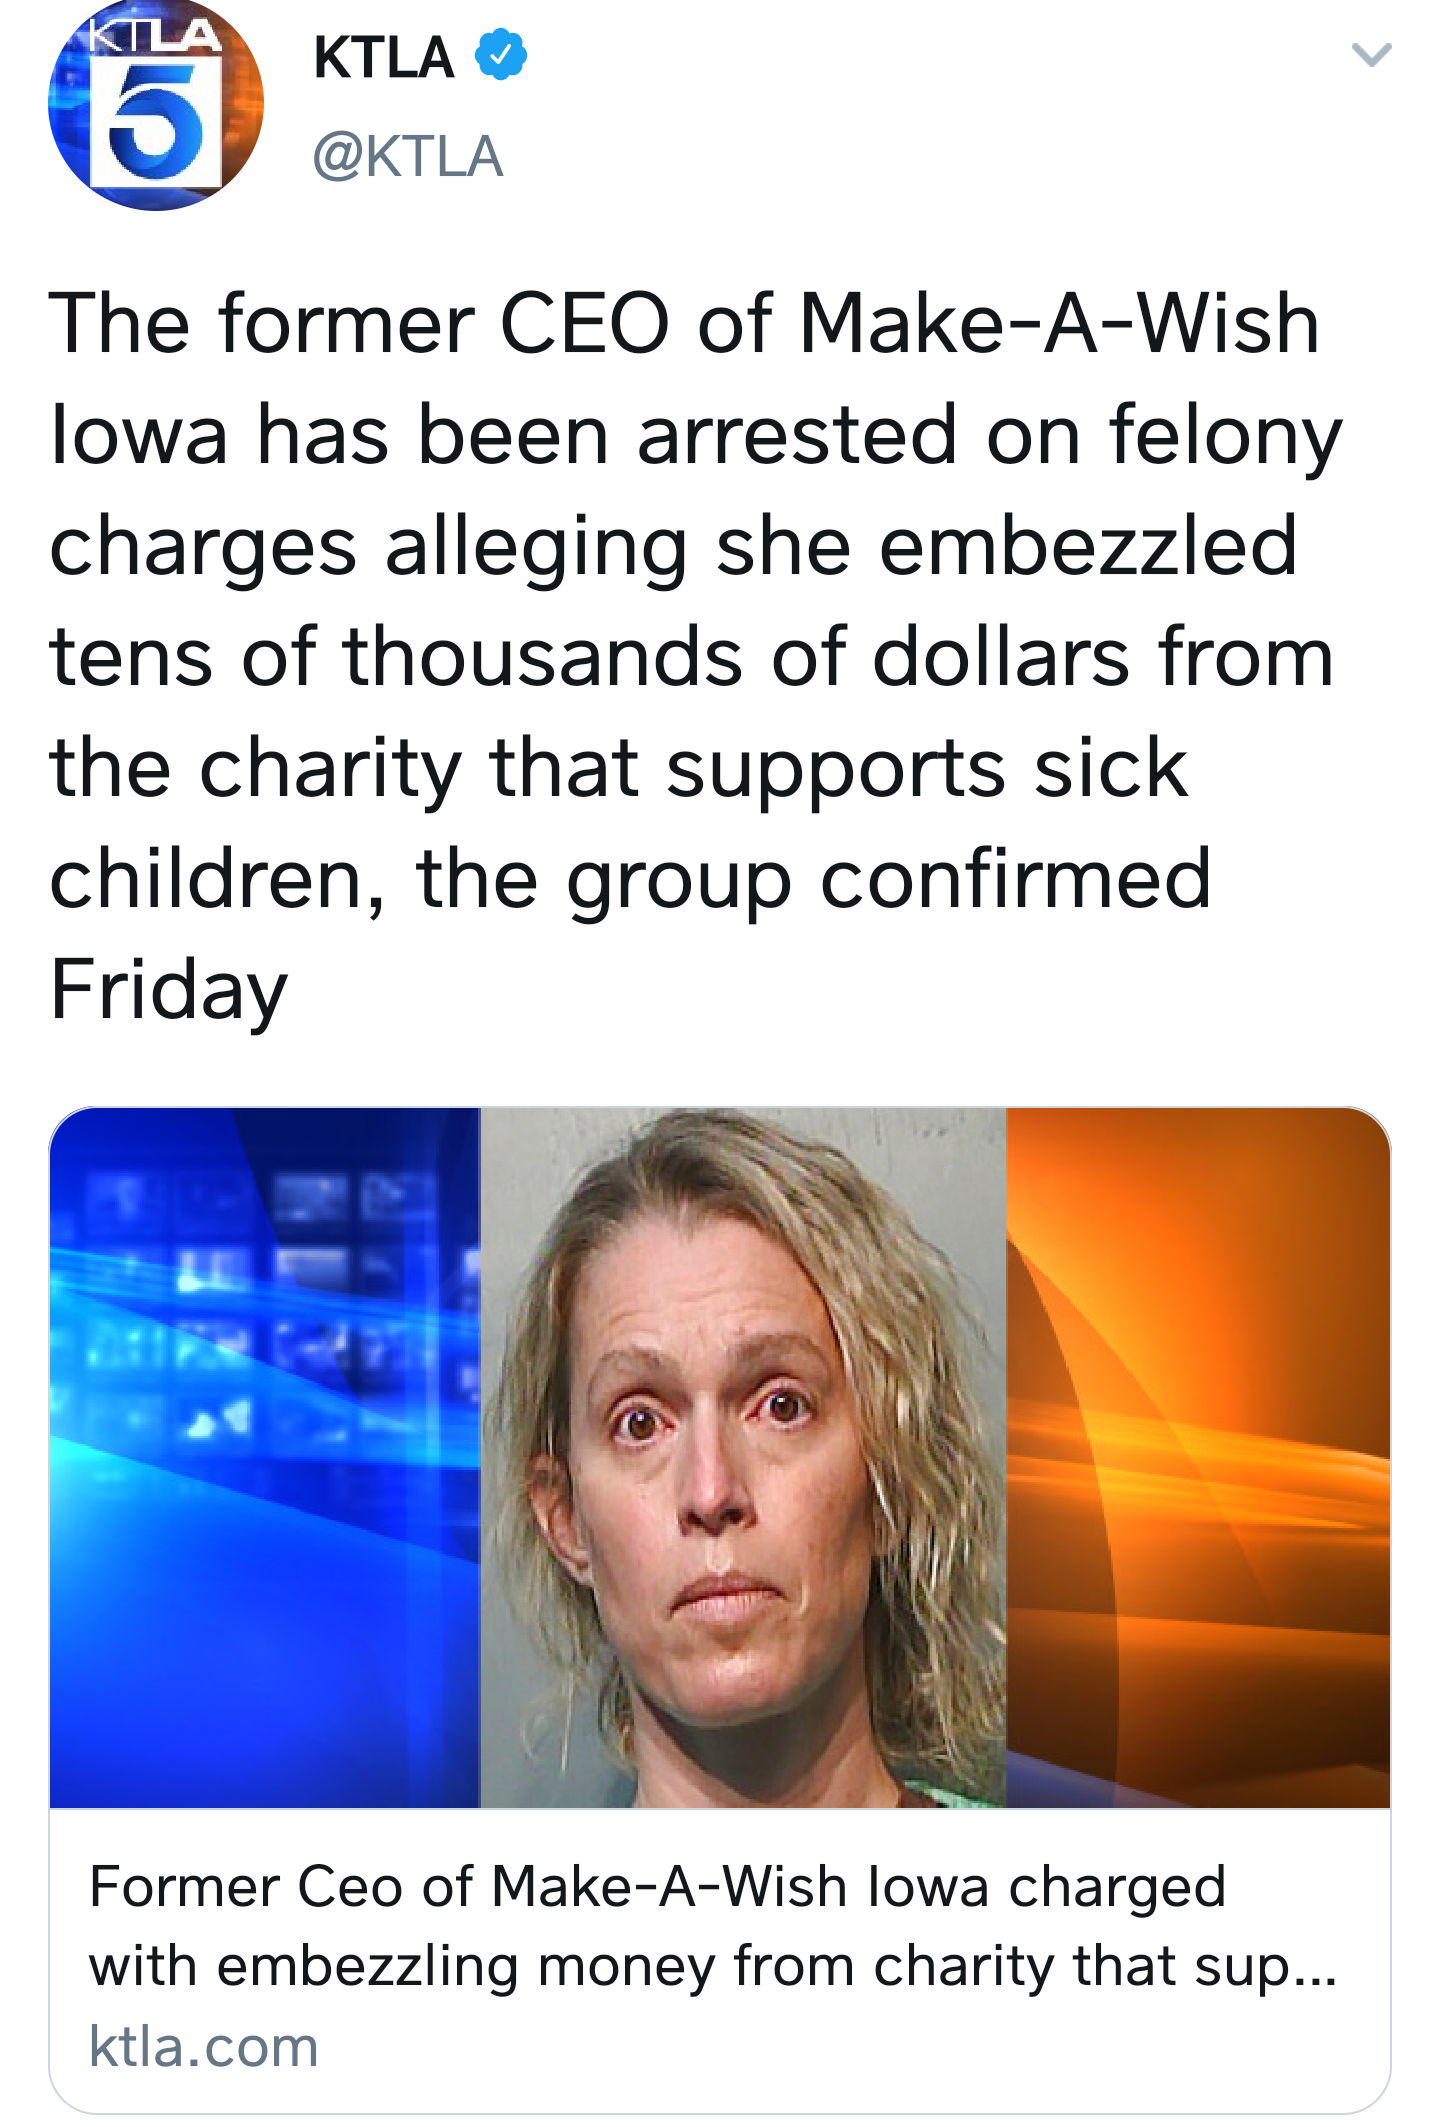 Felony - 6 Ktla The former Ceo of MakeAWish lowa has been arrested on felony charges alleging she embezzled tens of thousands of dollars from the charity that supports sick children, the group confirmed Friday Former Ceo of MakeAWish lowa charged with emb